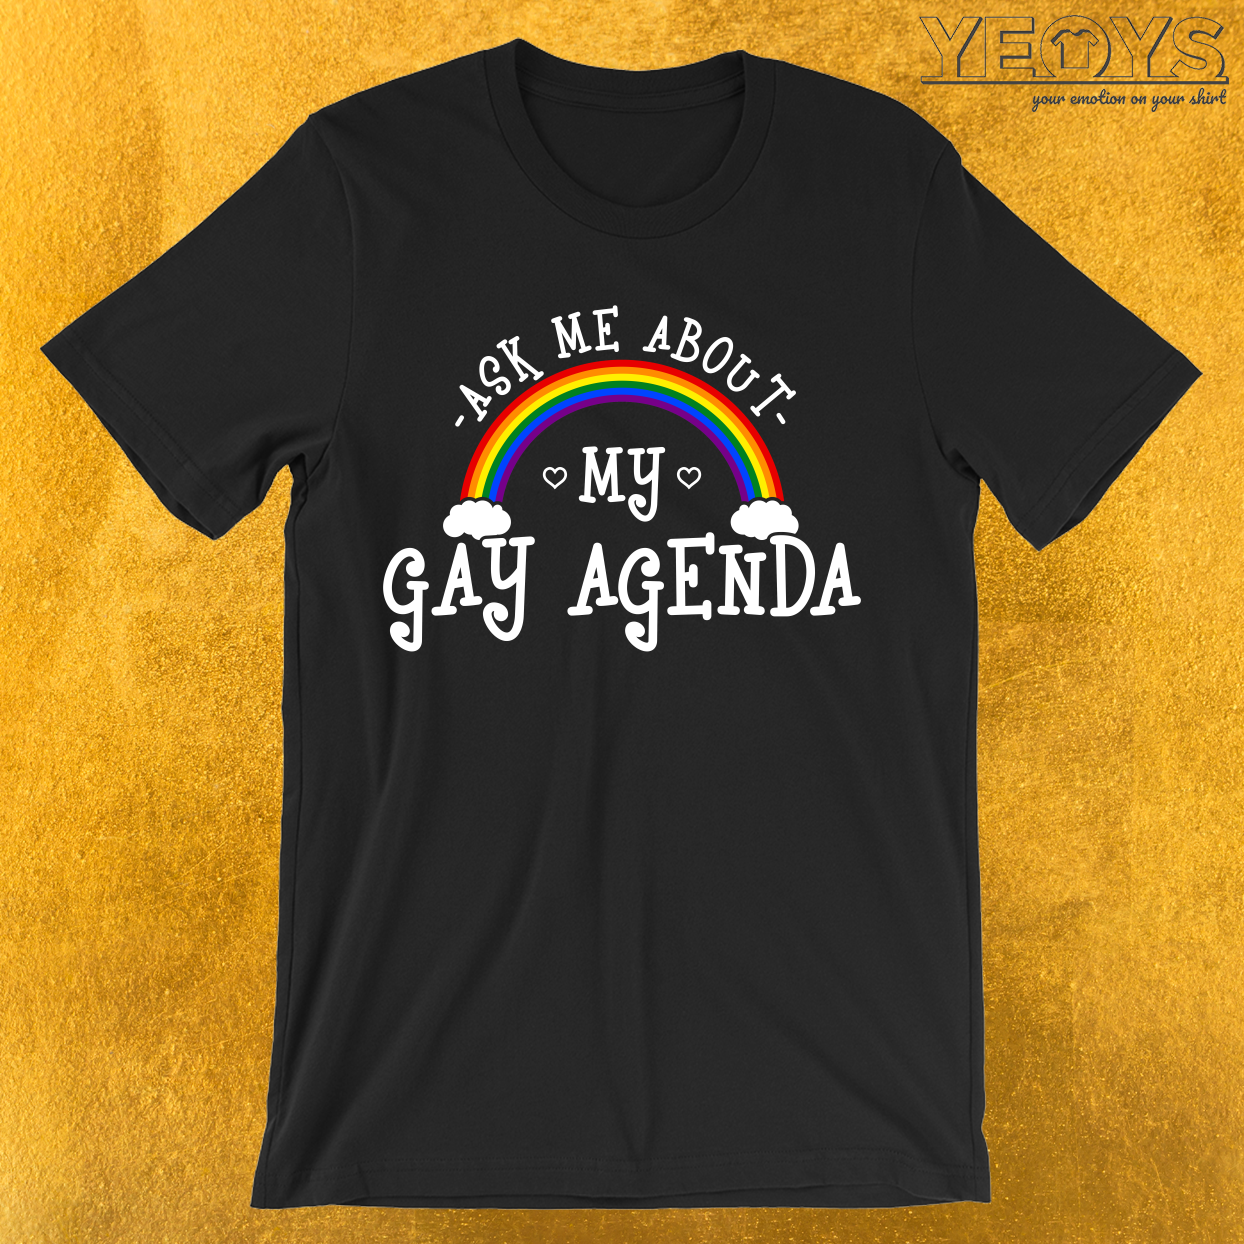 Ask Me About My Gay Agenda T-Shirt